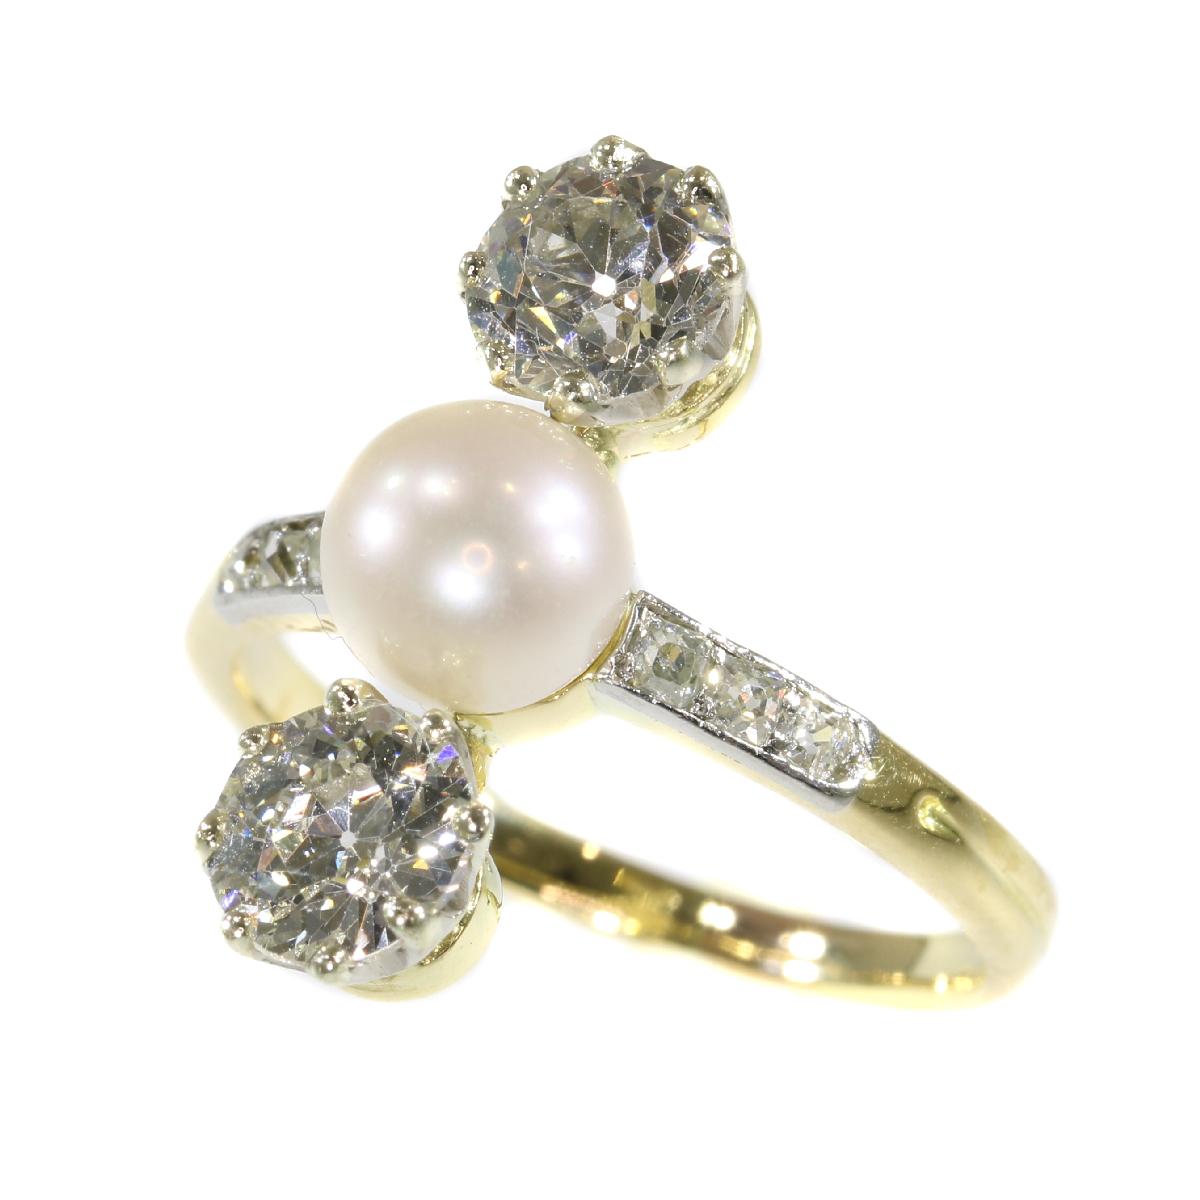 Vintage Diamond and Pearl Engagement Ring Belle Epoque Period For Sale